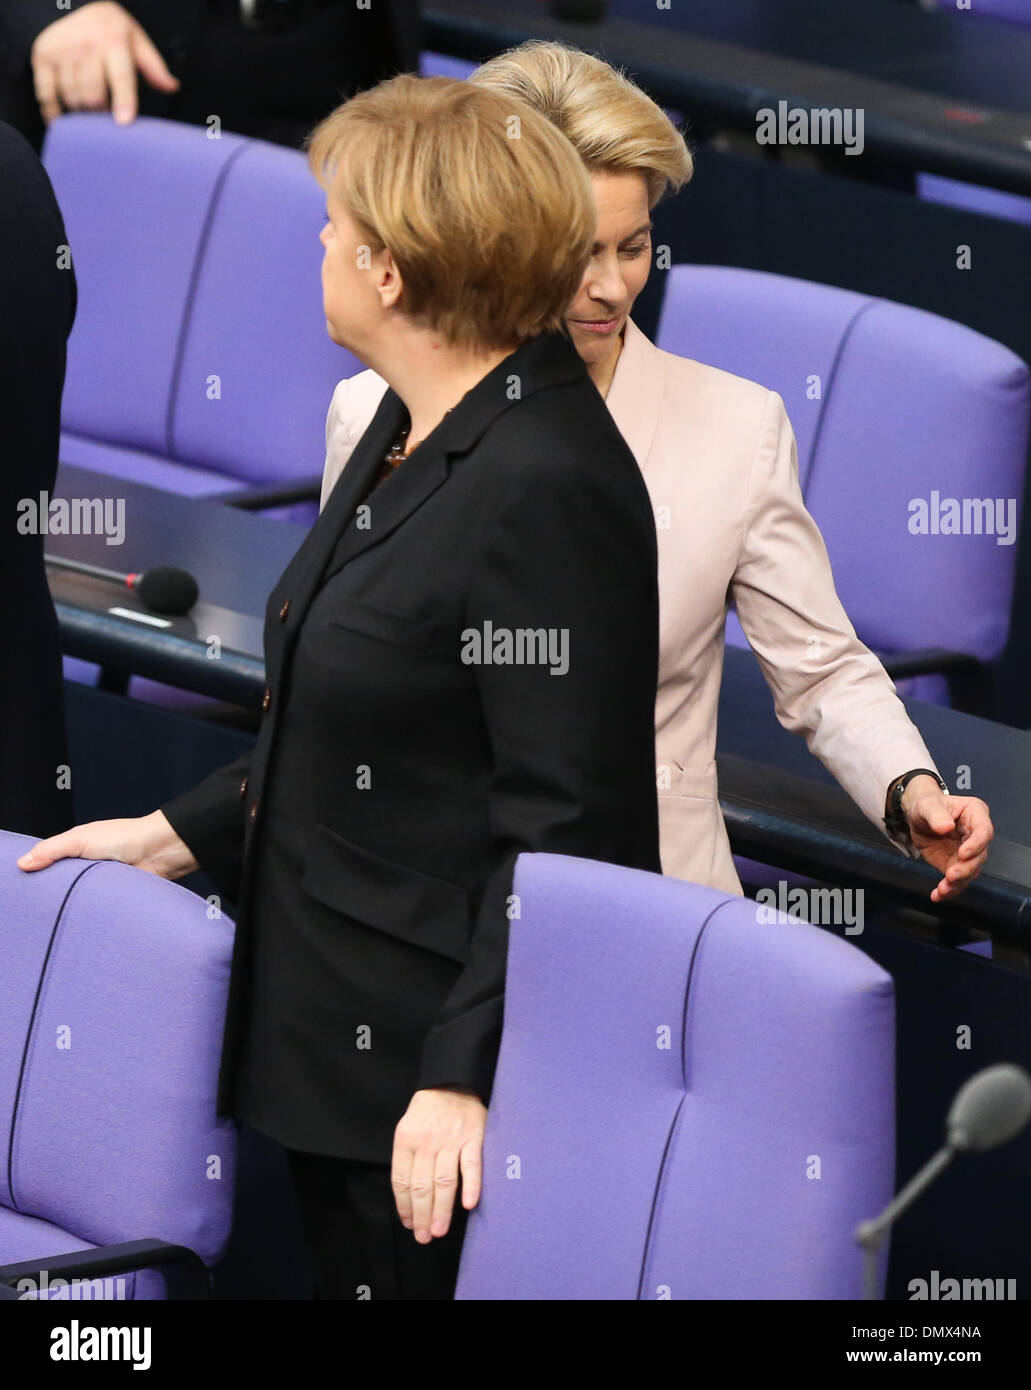 (131217) -- BERLIN, Dec. 17, 2013 (Xinhua) -- German Chancellor Angela Merkel (front) and German Minister of Defence Ursula von der Leyen attend the meeting of Bundestag, Germany's lower house of parliament, in Berlin, Germany on Dec. 17, 2013. German new government headed by Chancellor Angela Merkel was sworn into office on Tuesday to rule Europe's biggest economy for the next four years. Cabinet ministers of the new coalition government, are formed by Merkel's Christian Democratic Union (CDU), its Bavarian sister party Chrisitian Social Union (CSU), and the Social Democrats (SPD). (Xinhua/Z Stock Photo